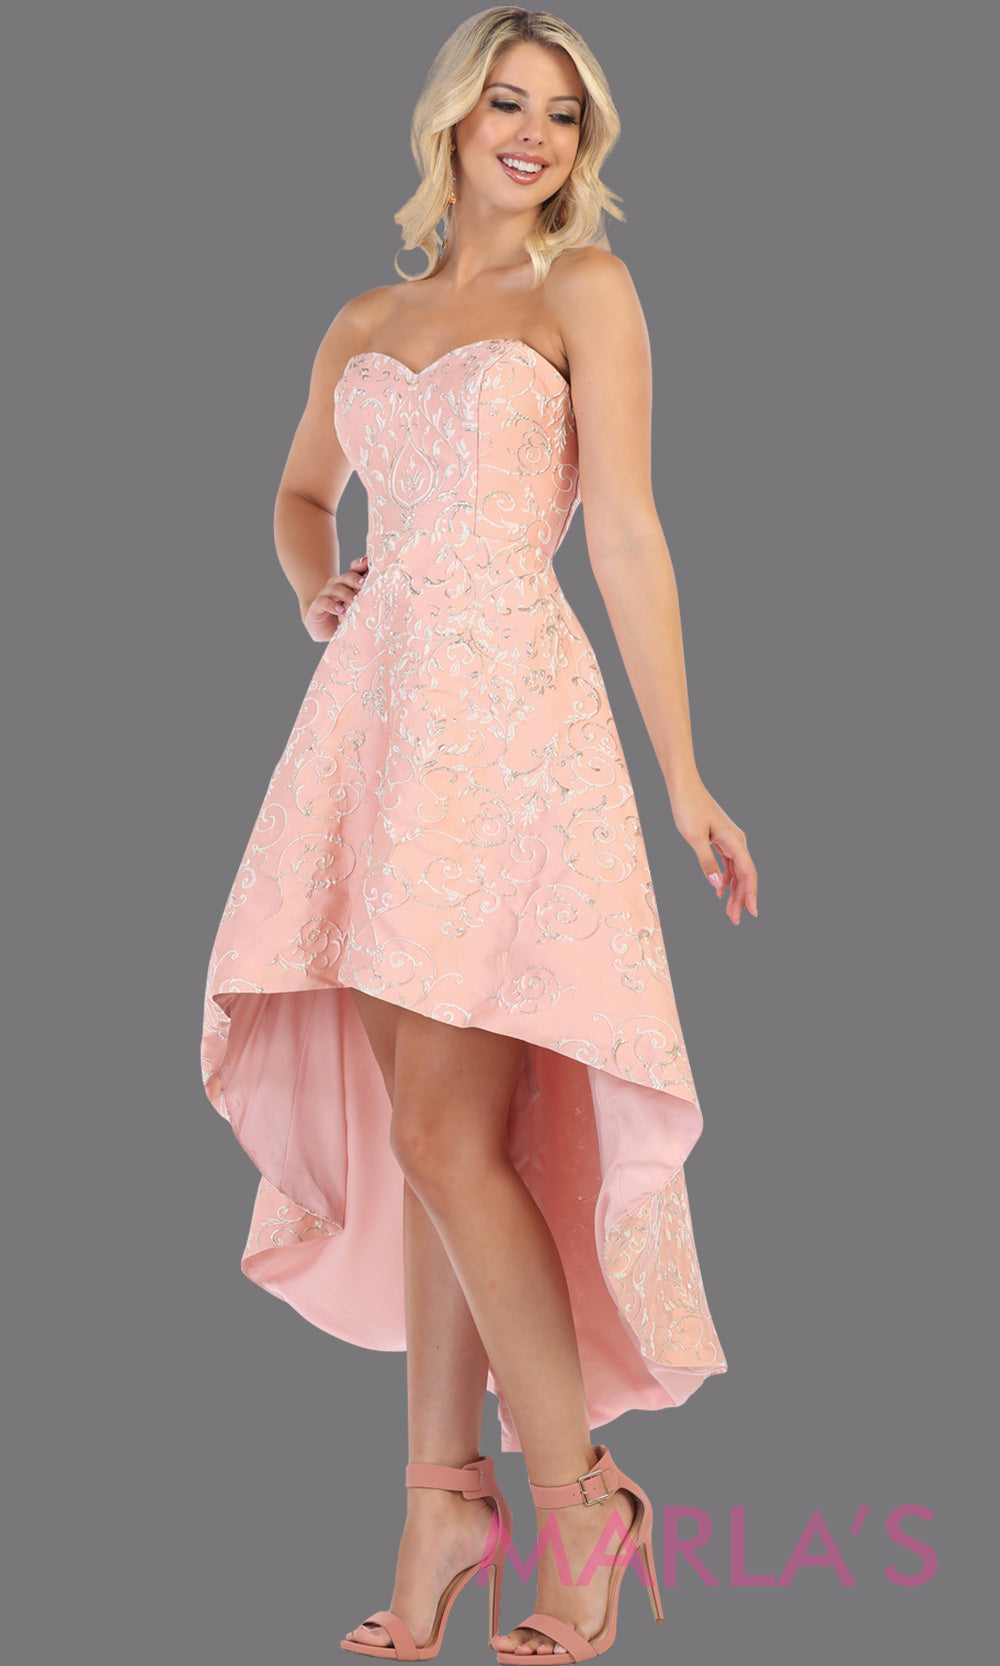 High low strapless blush pink semi formal party dress. This hi lo dress is perfect as a wedding guest dress, prom guest, grade 8 graduation, graduation, wedding guest dress, engagement shoot, plus size dresses, indowestern party dress.